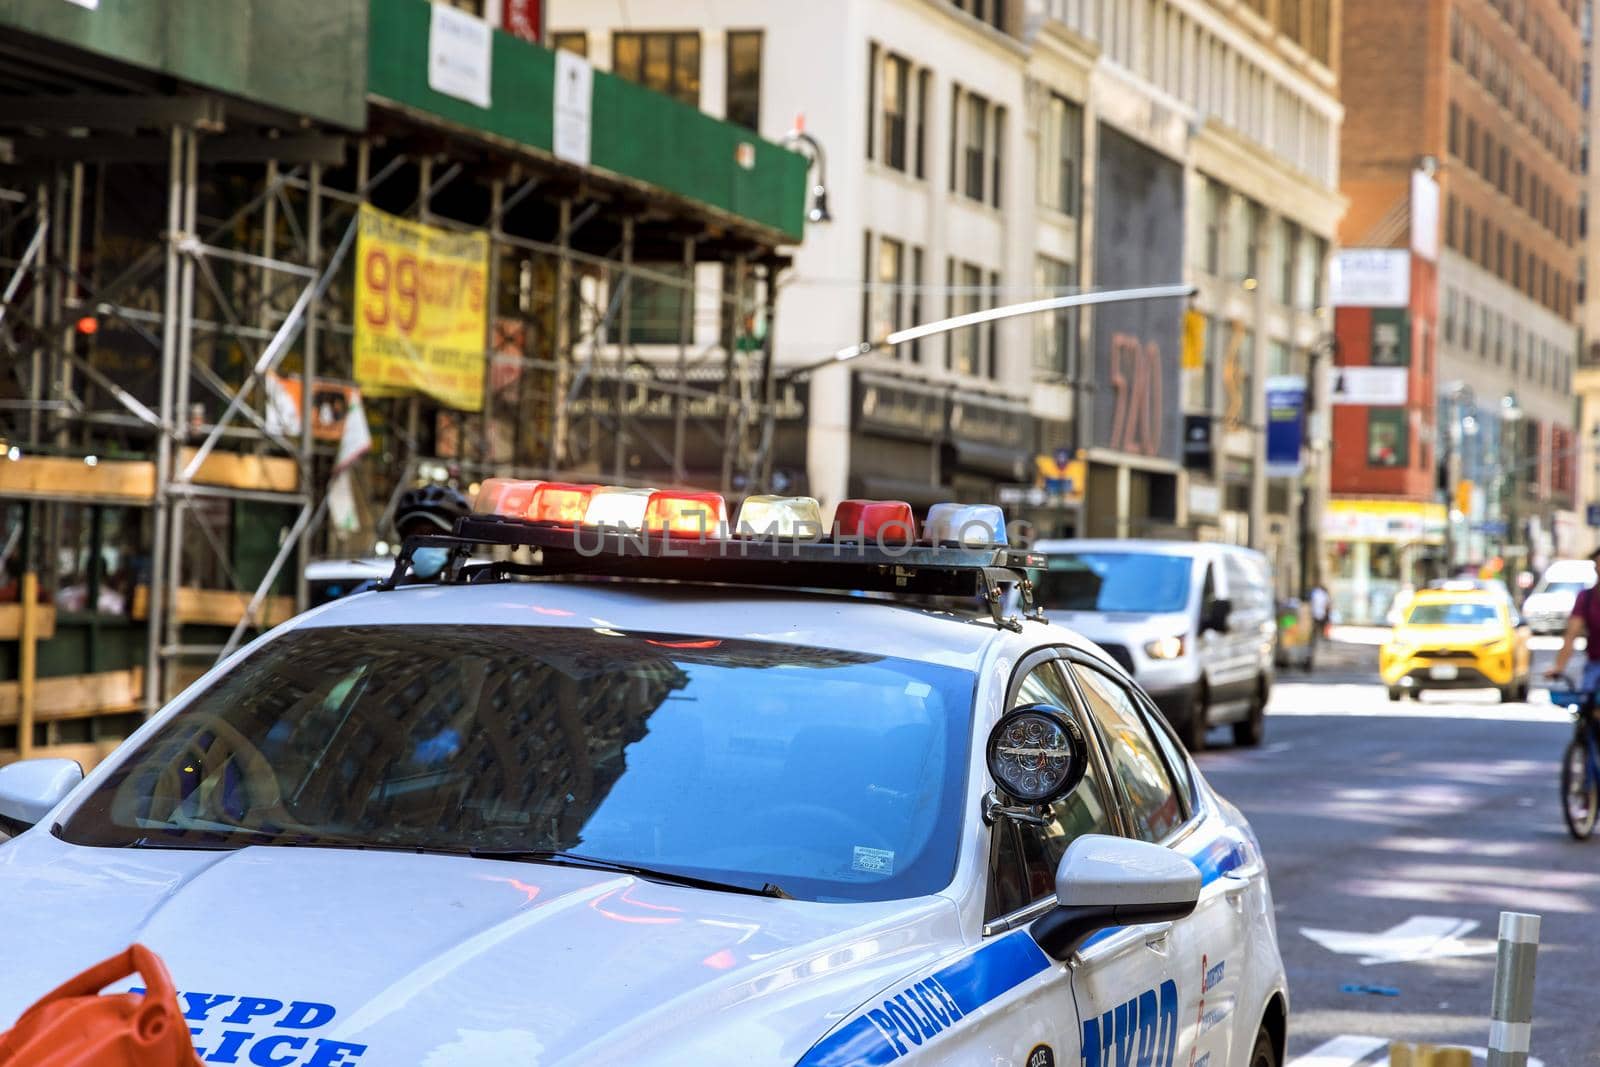 A police car with light flashes on the roof rush an emergency call in New York City by ungvar